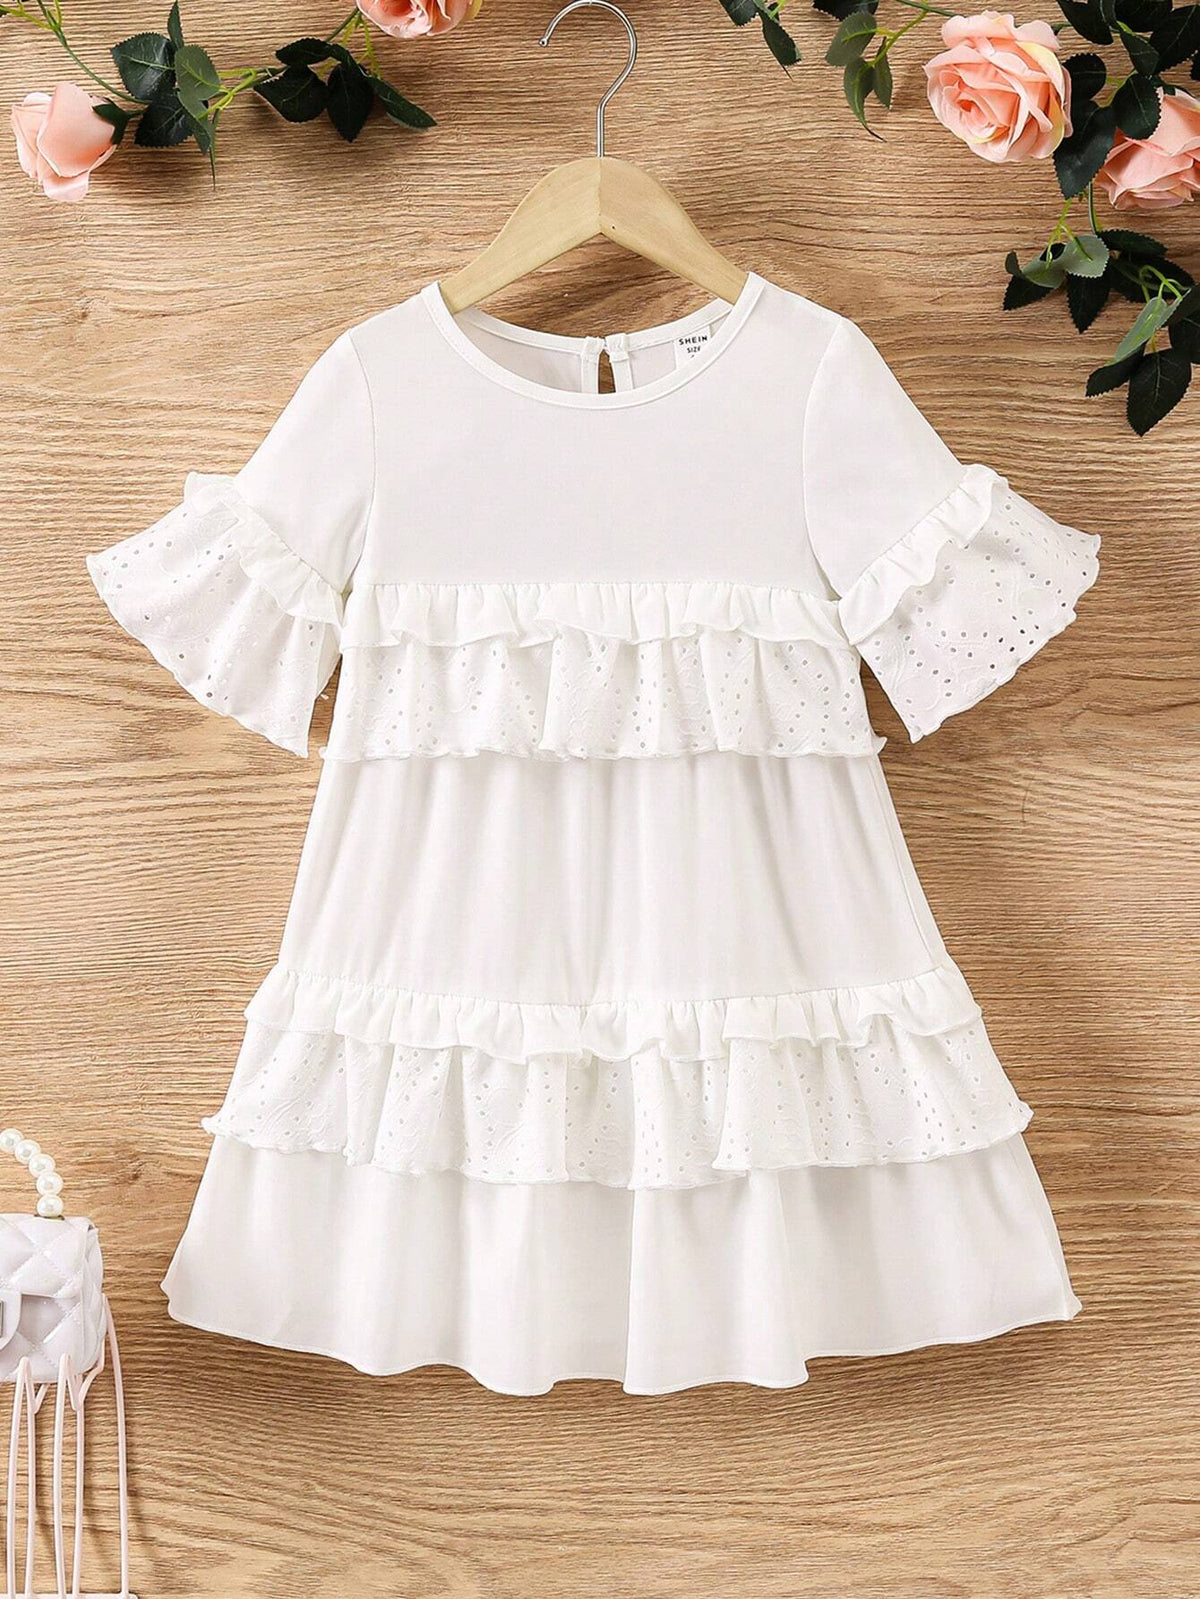 Girls" White Hollow Multilayer Pleated Dress, Fashionable And Versatile With Mushroom Lace Trim And Cute Casual Short Sleeves, Spring And Summer New Style